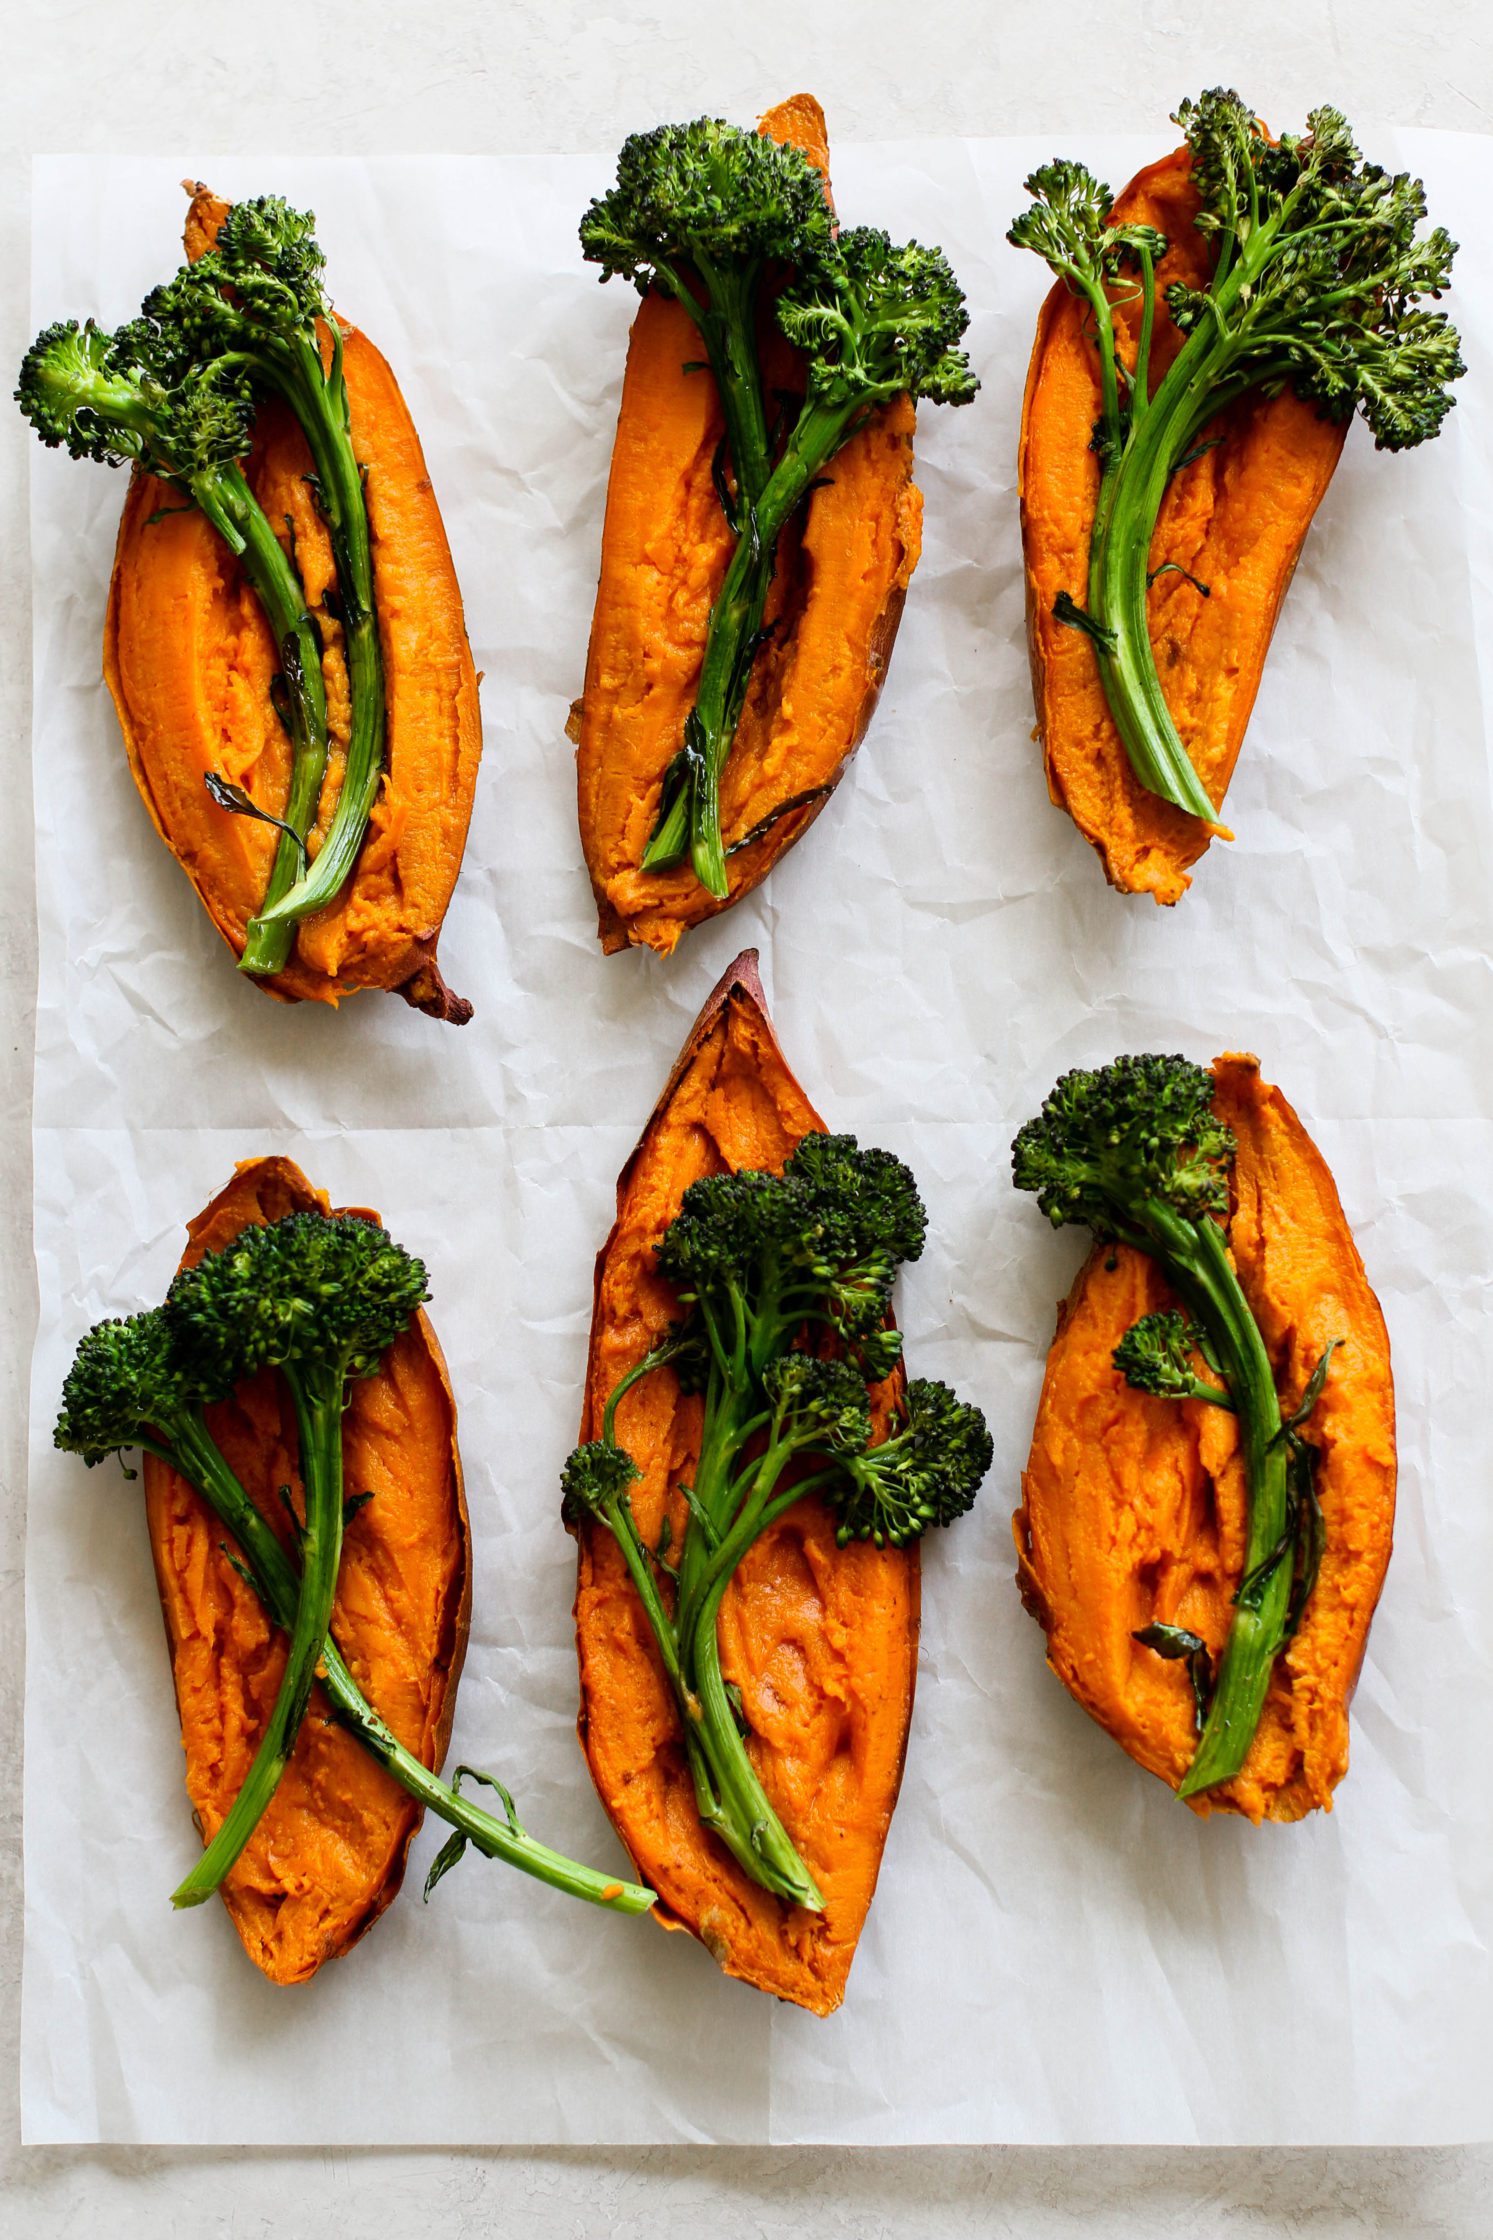 Sweet Potato Boats baked topped with roasted broccoli on parchment paper by Flora & Vino